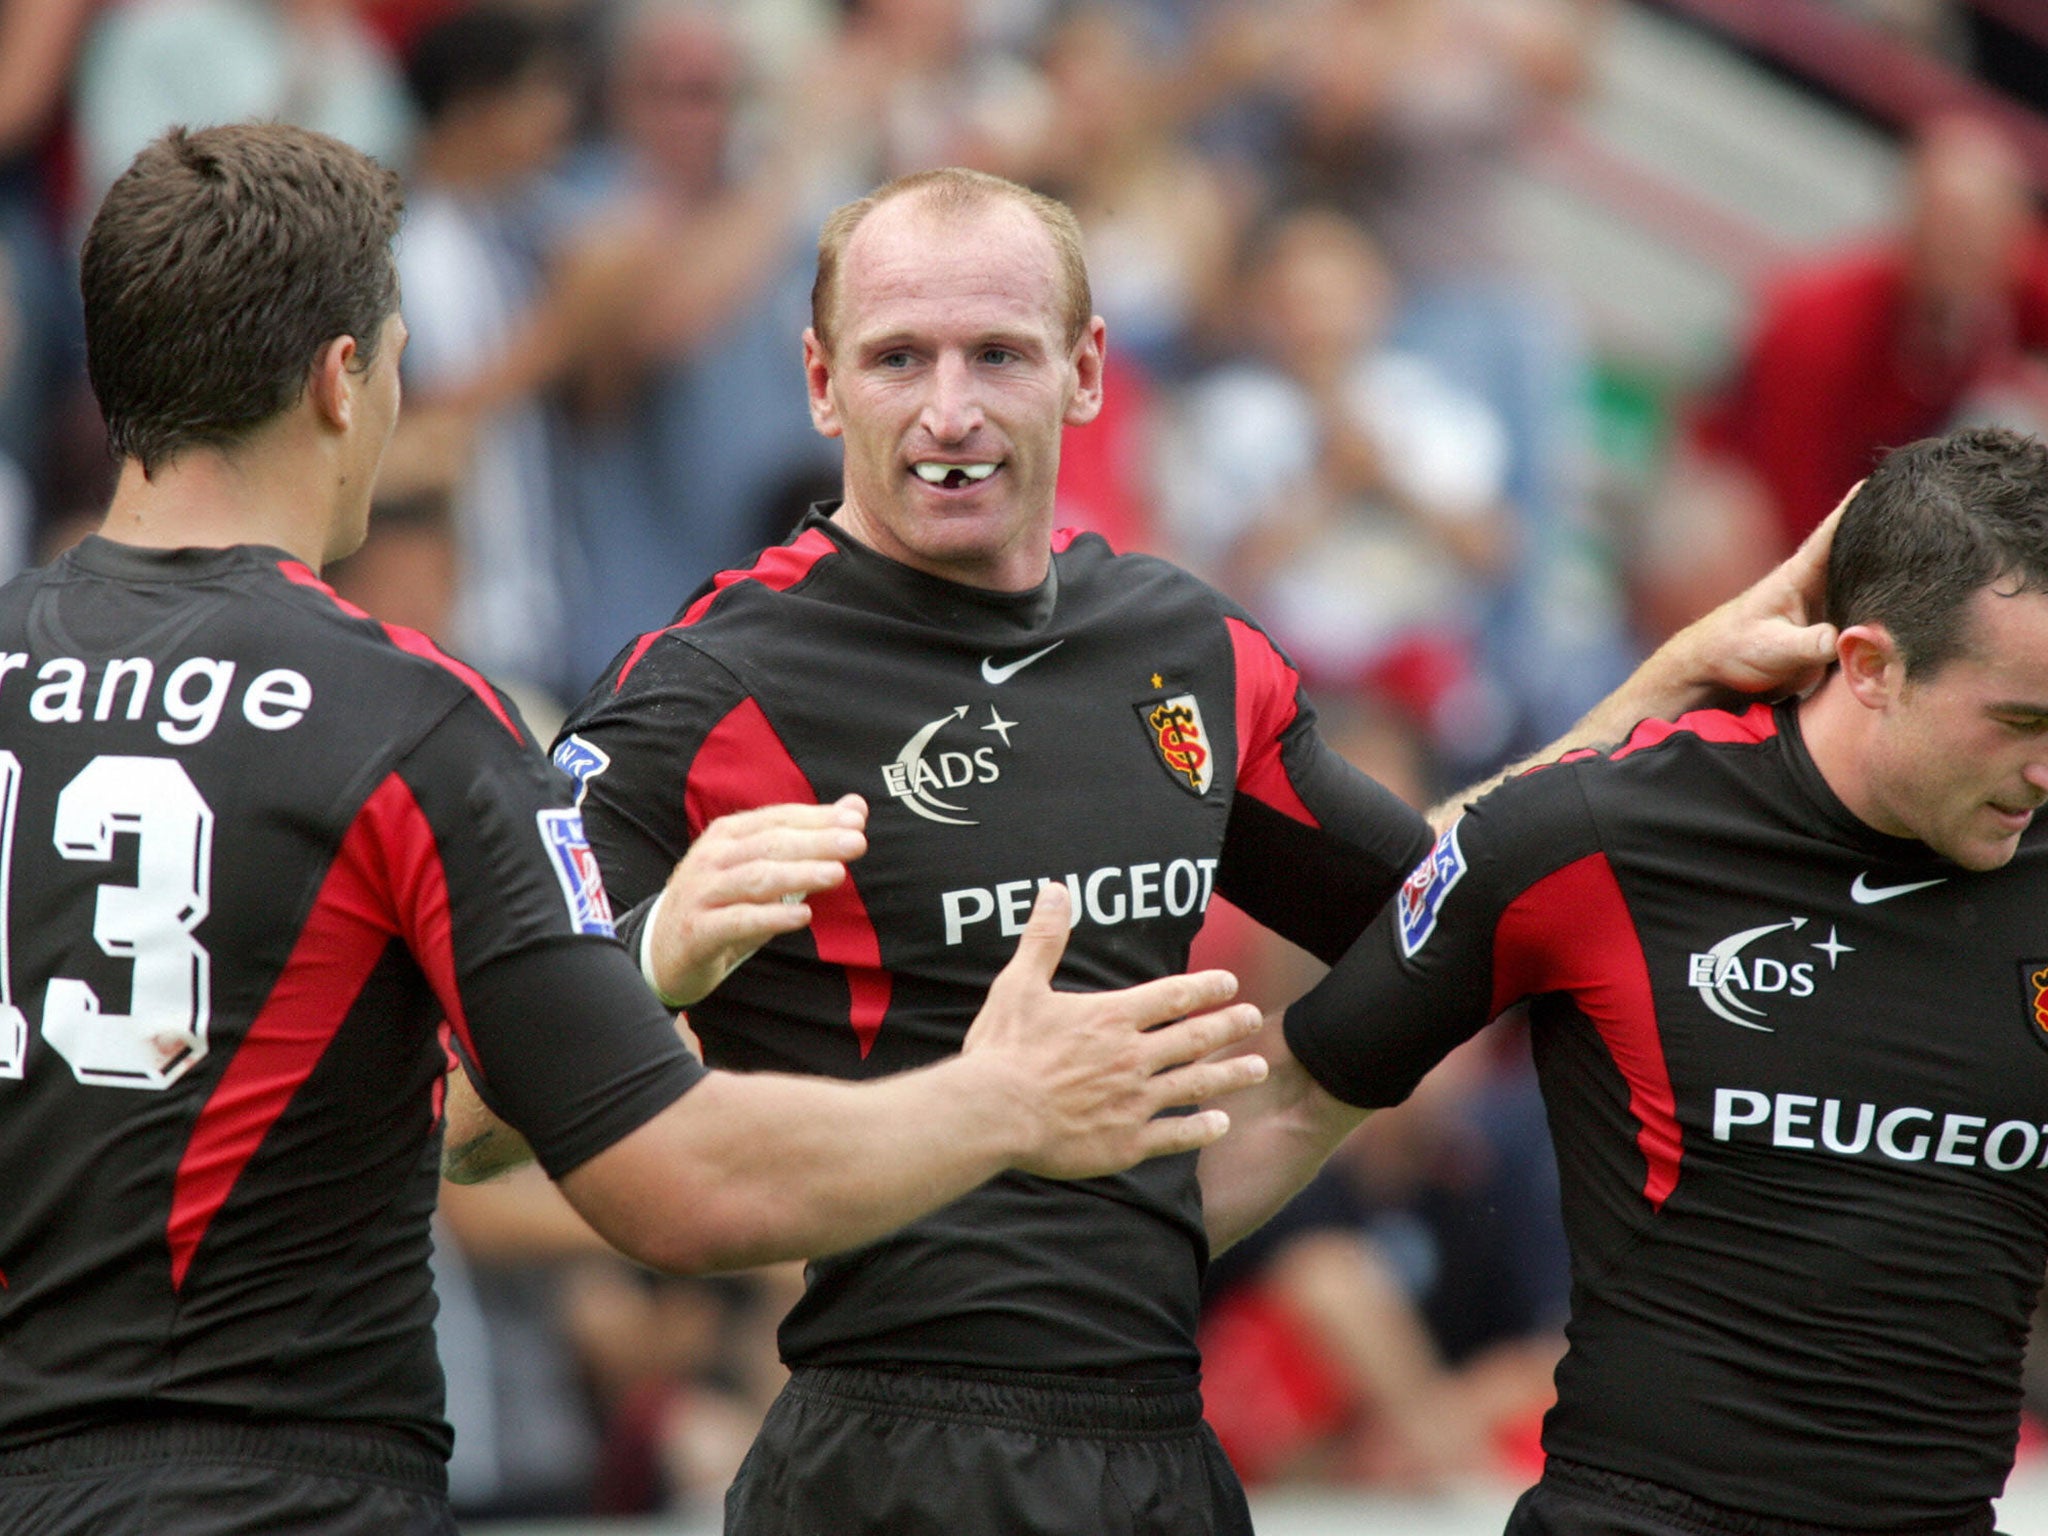 Gareth Thomas spent three years in France with Toulouse